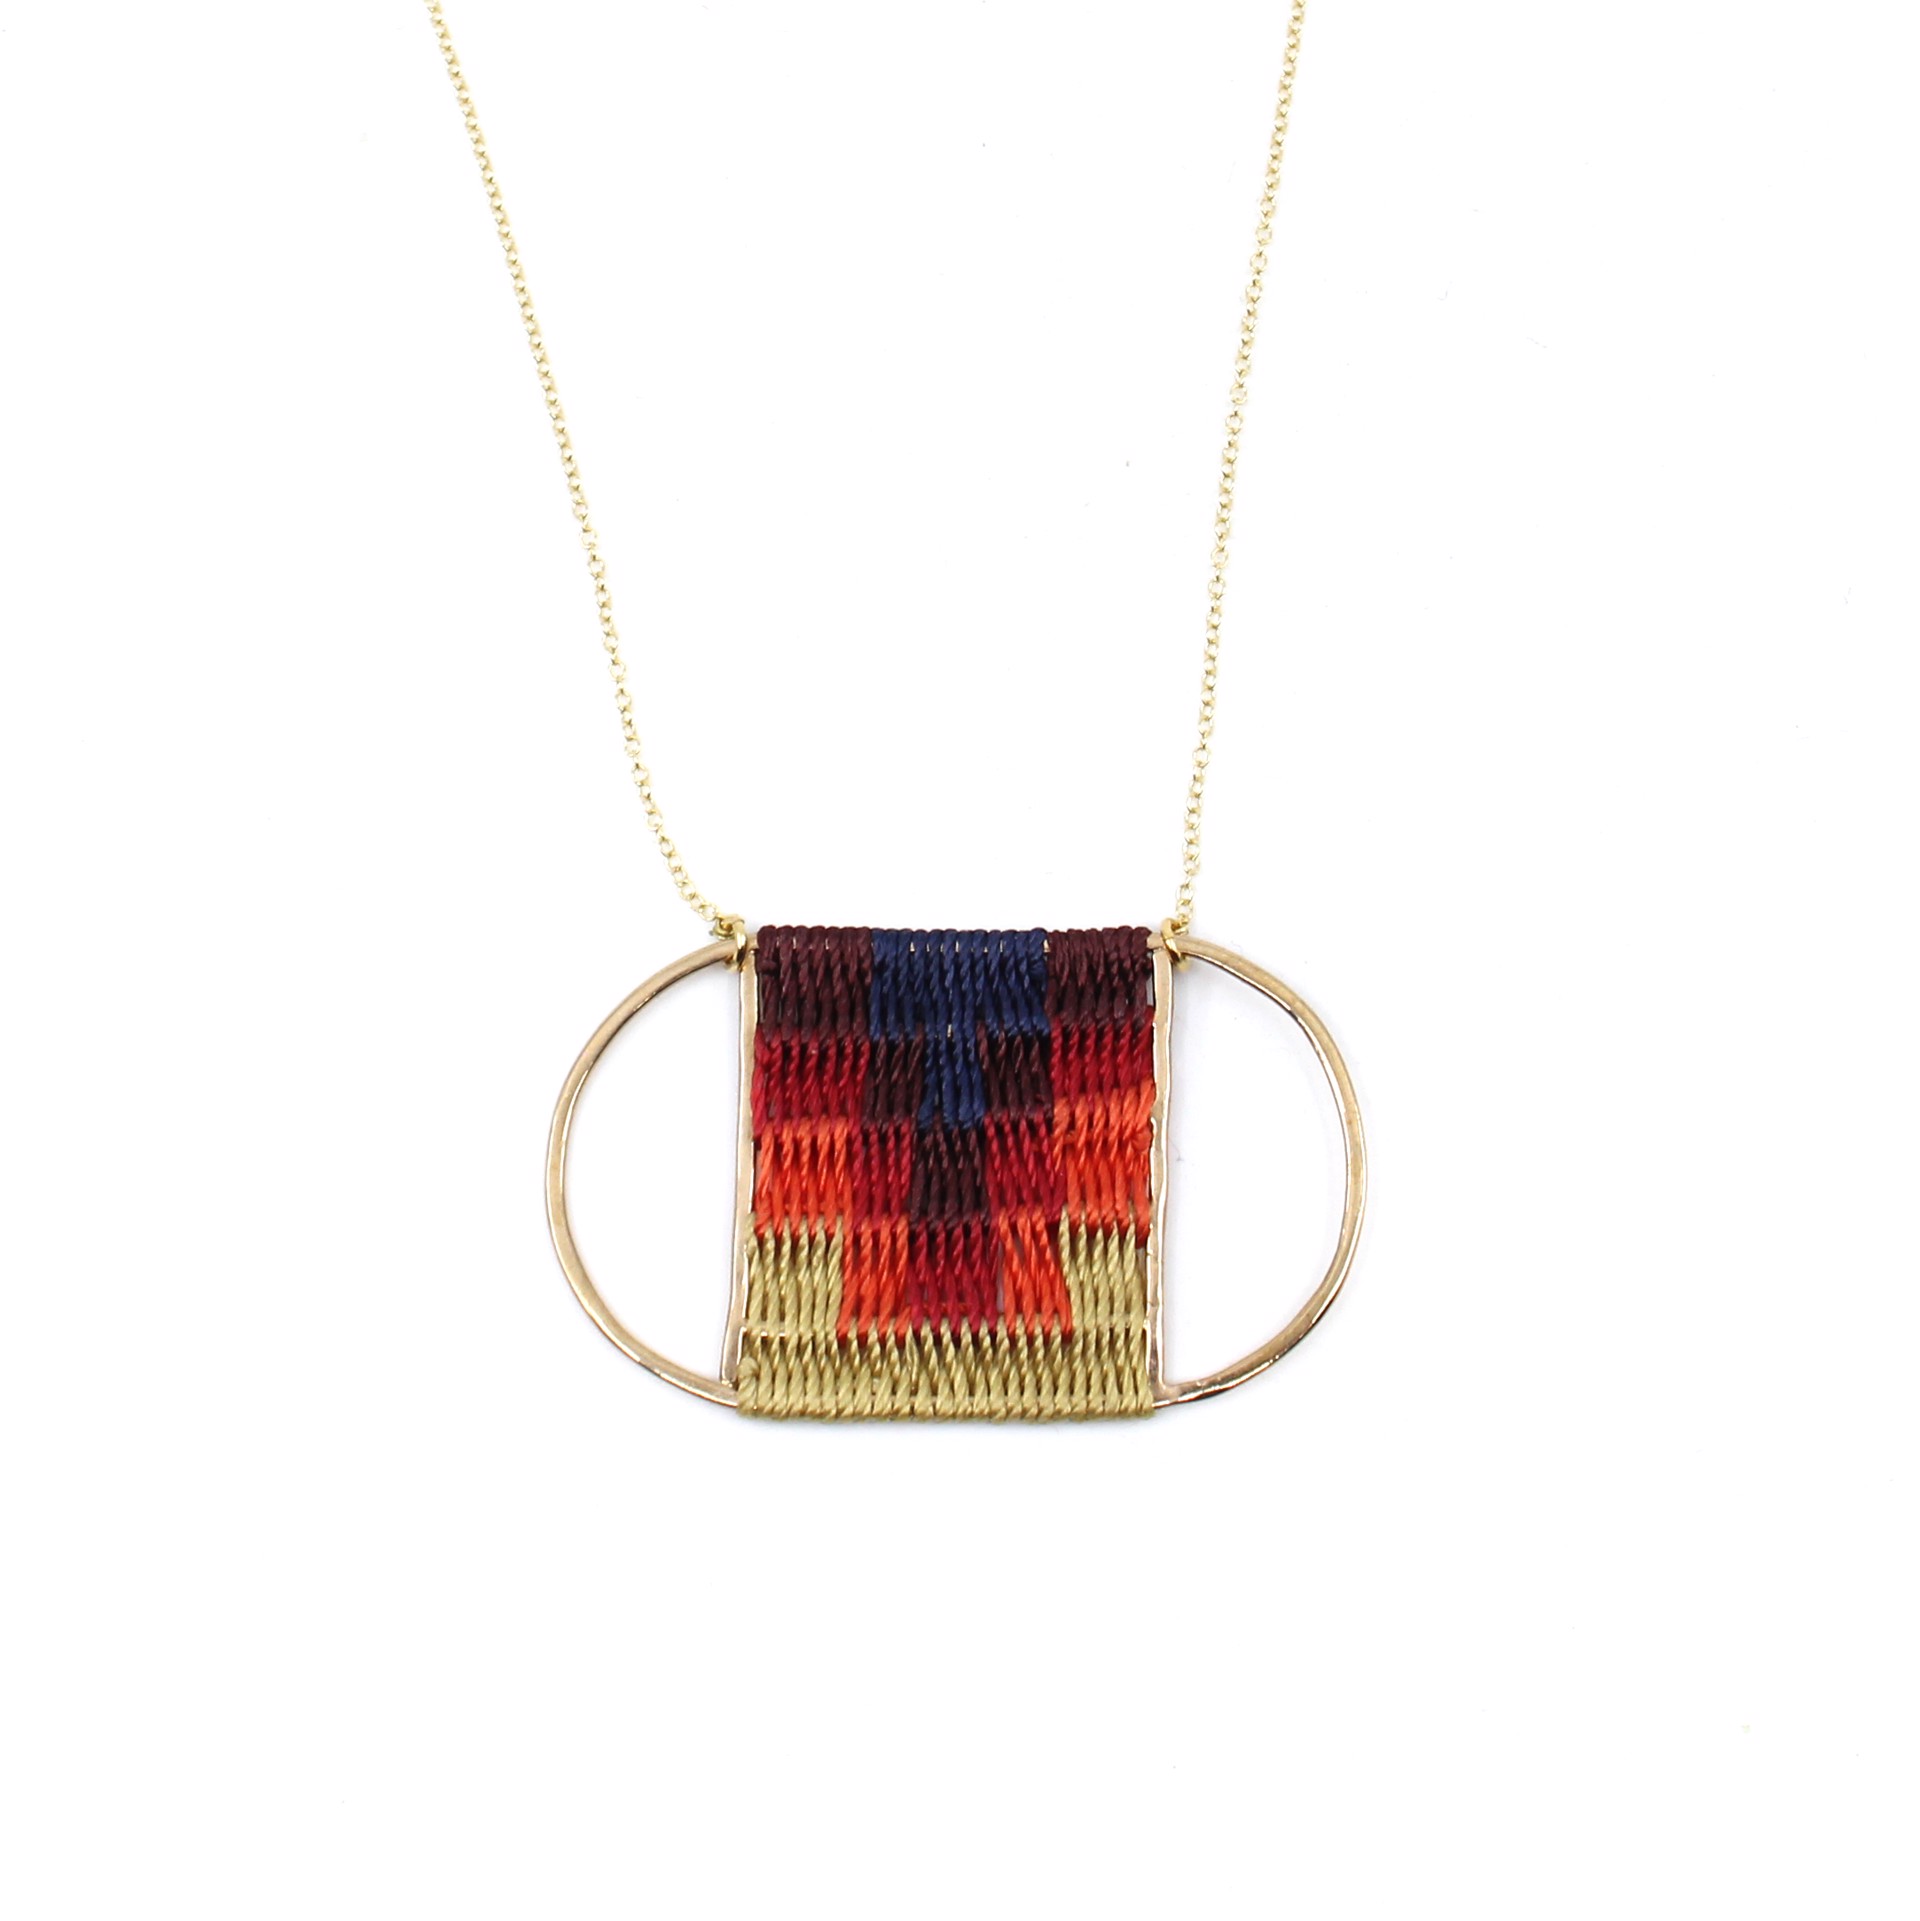 Flag Necklace by Flag Mountain Jewelry